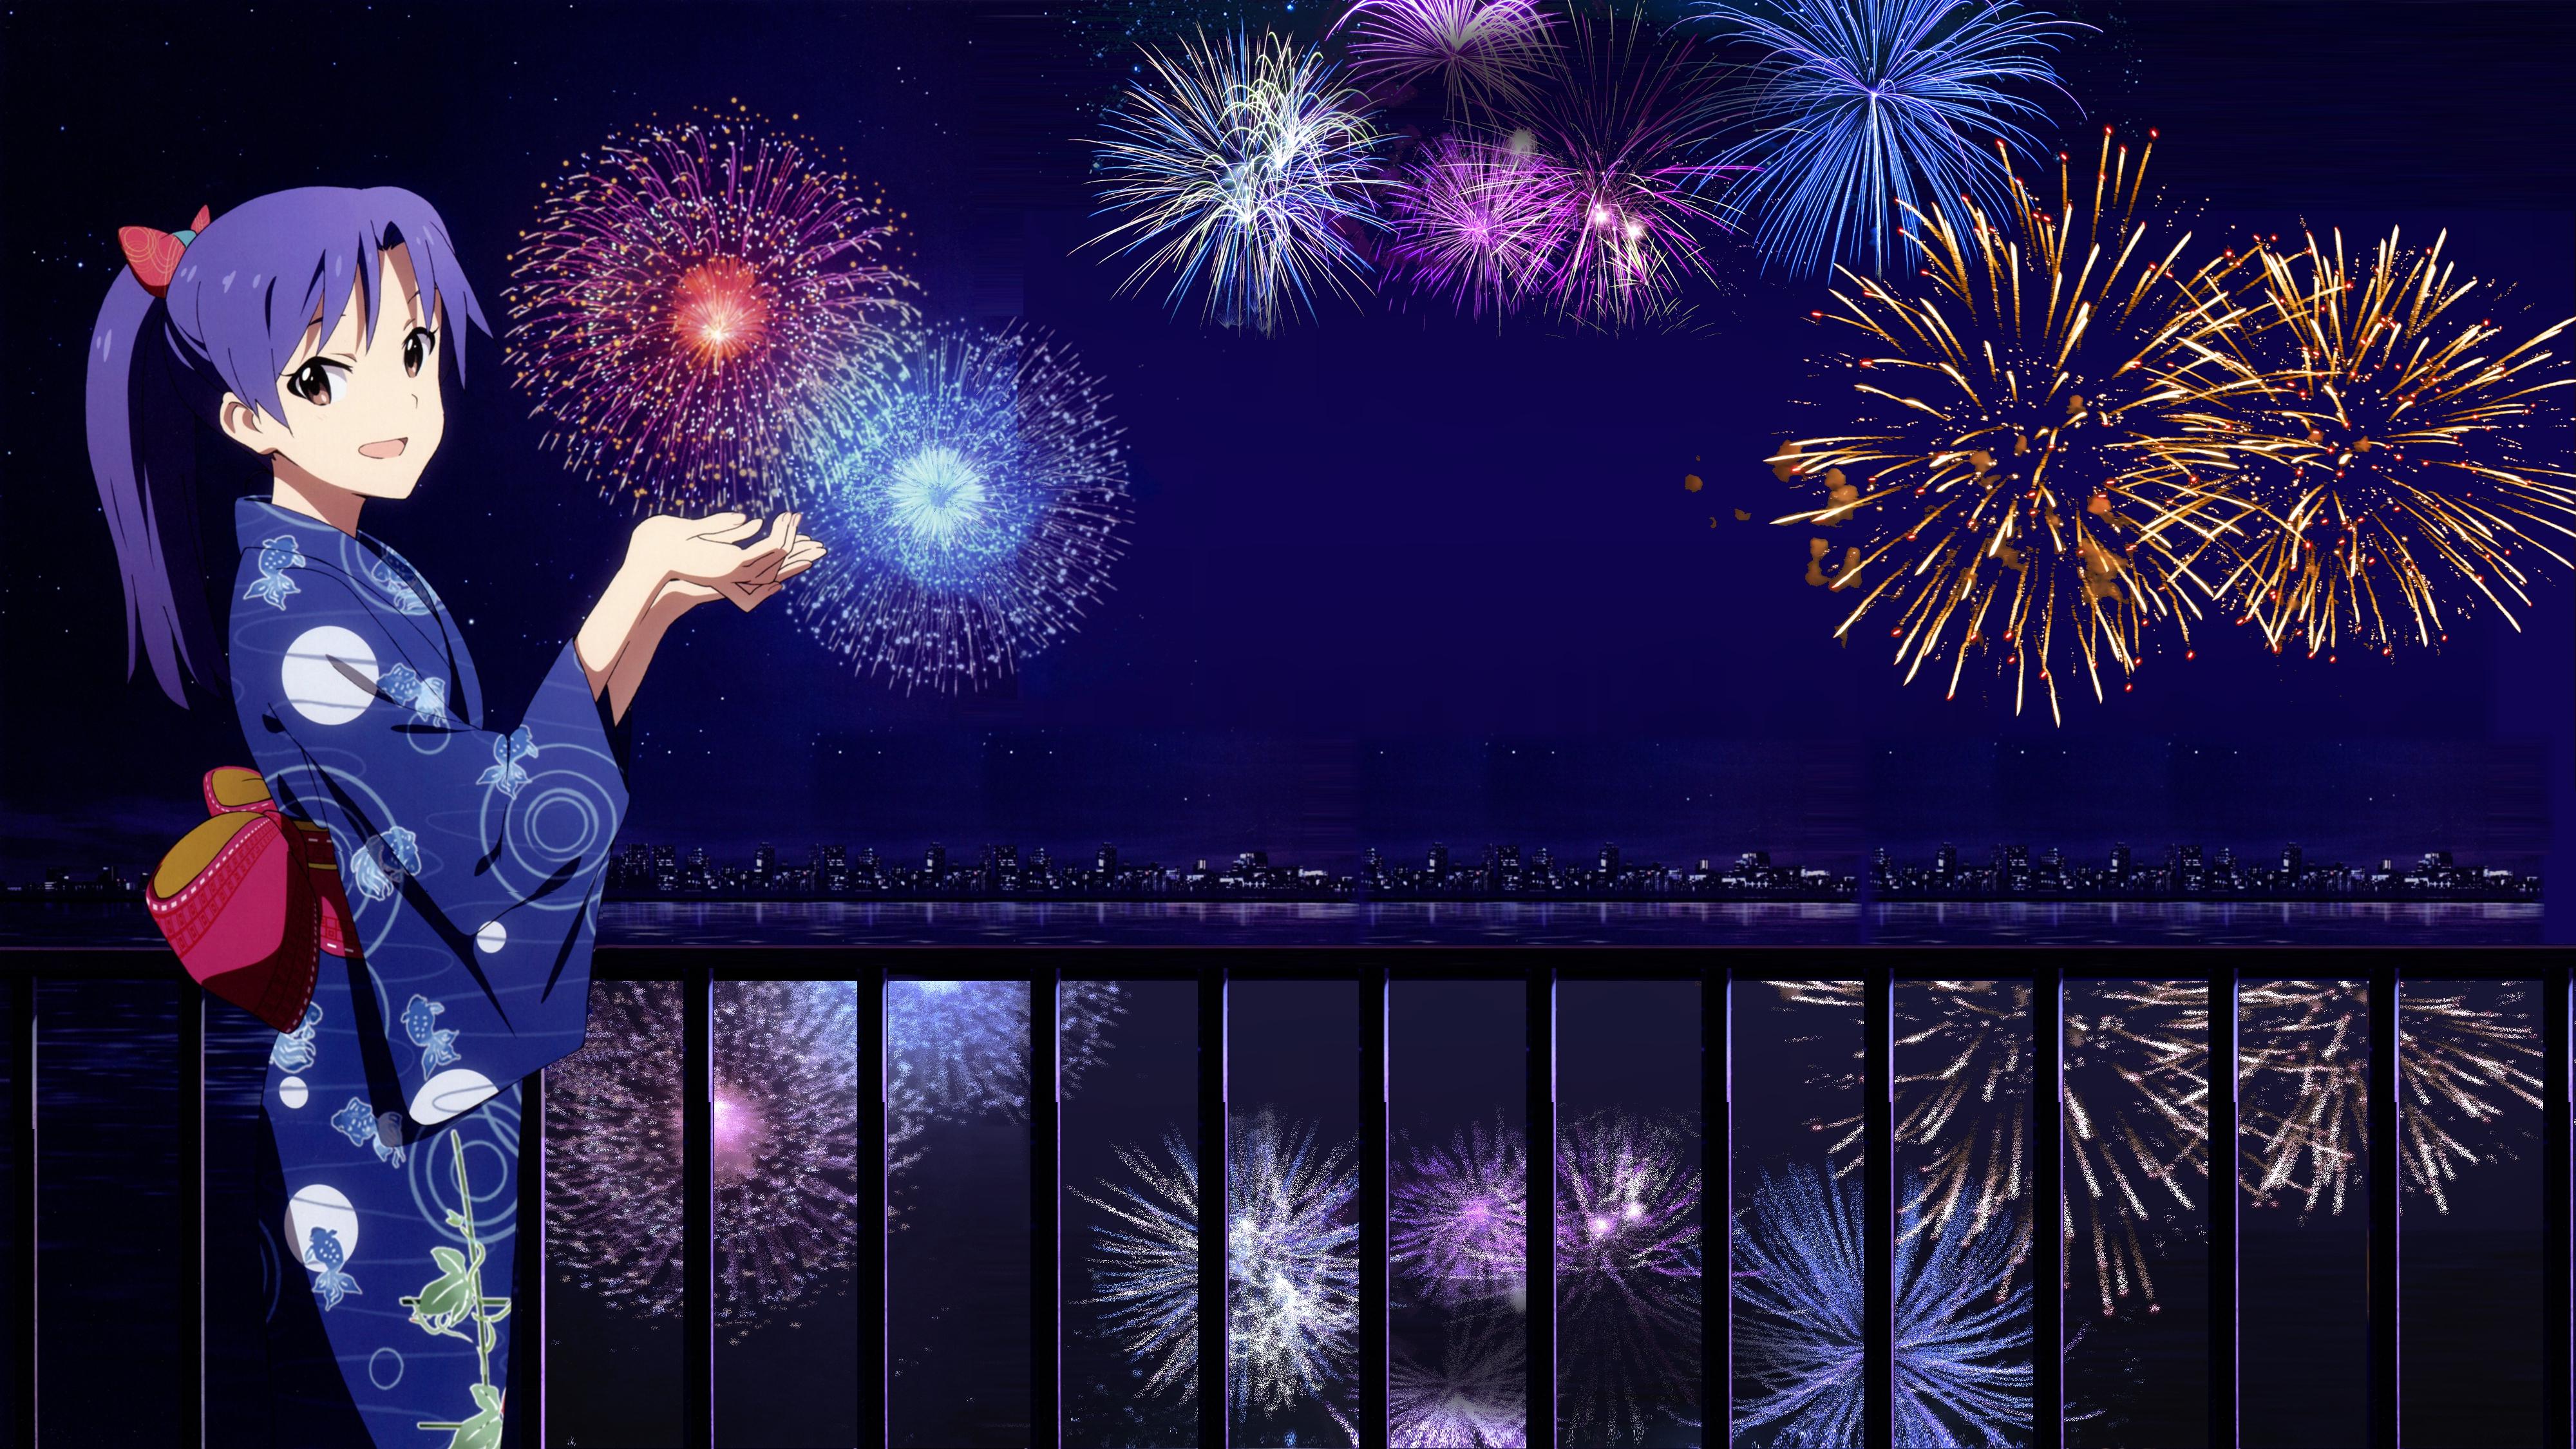 Anime Girl And Fireworks Wallpapers